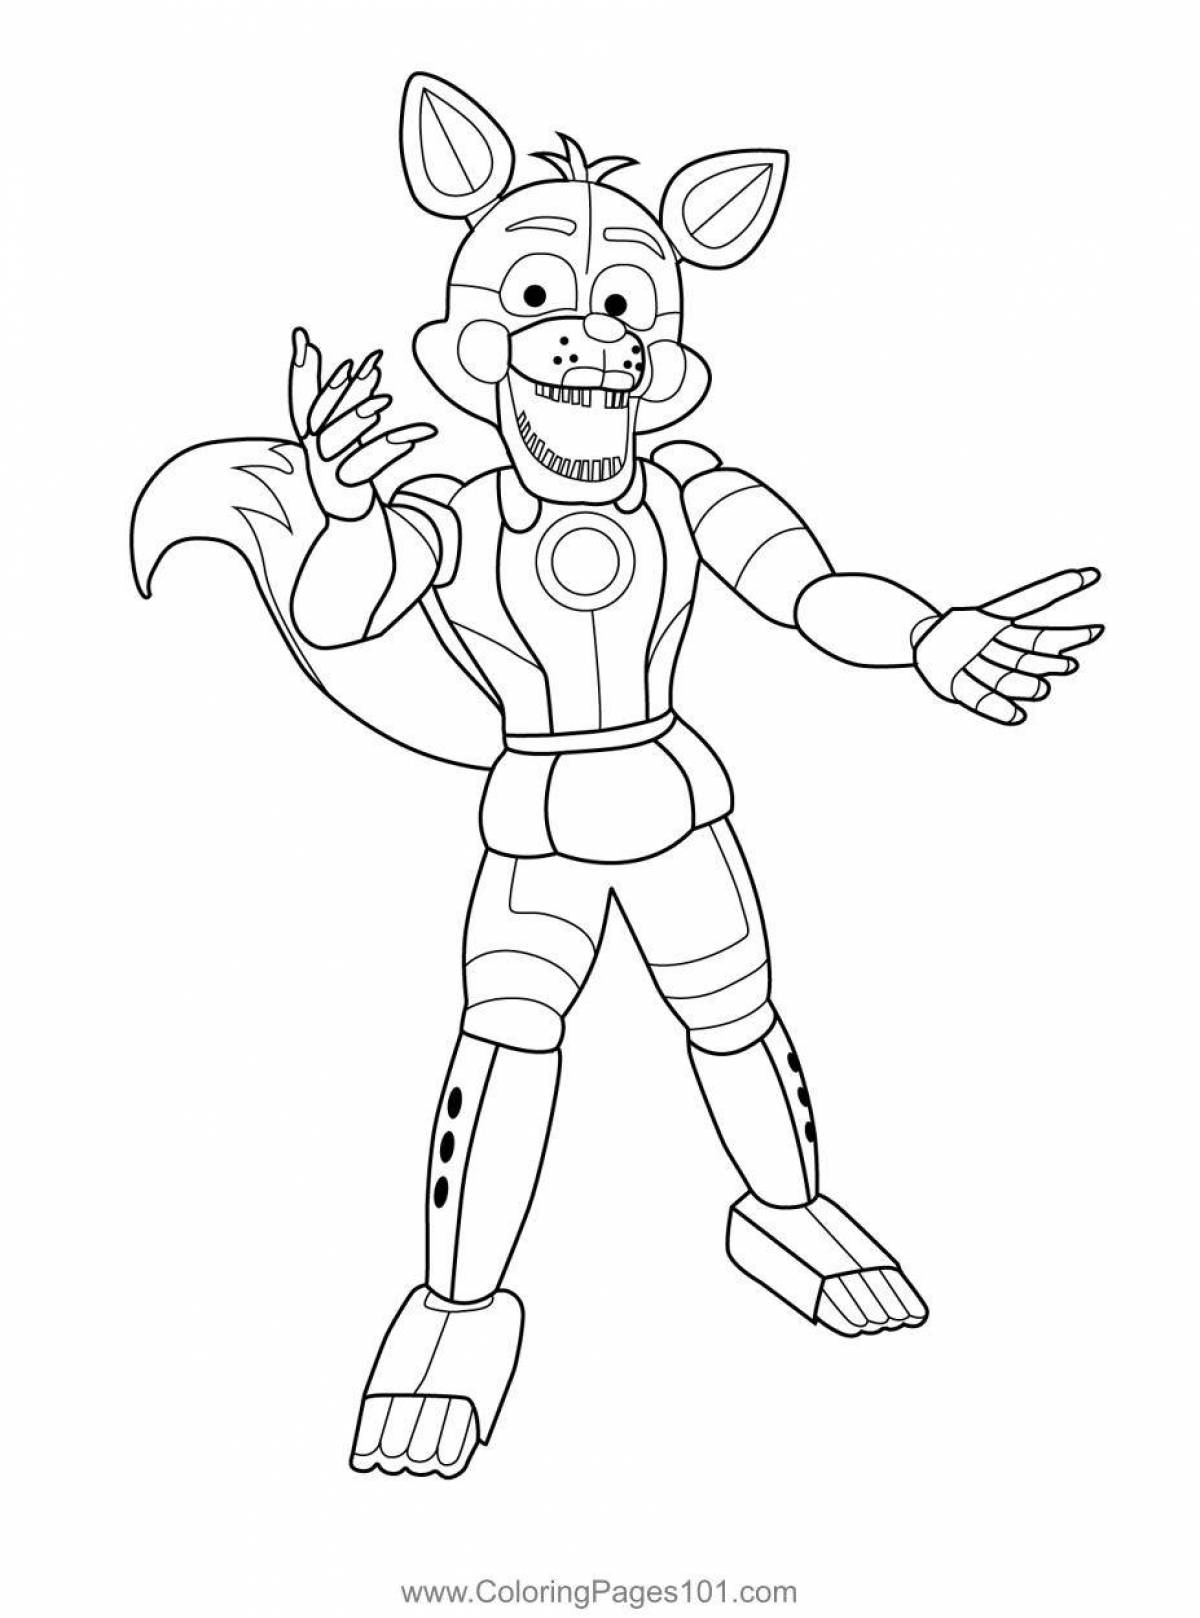 Freddy glowing coloring book